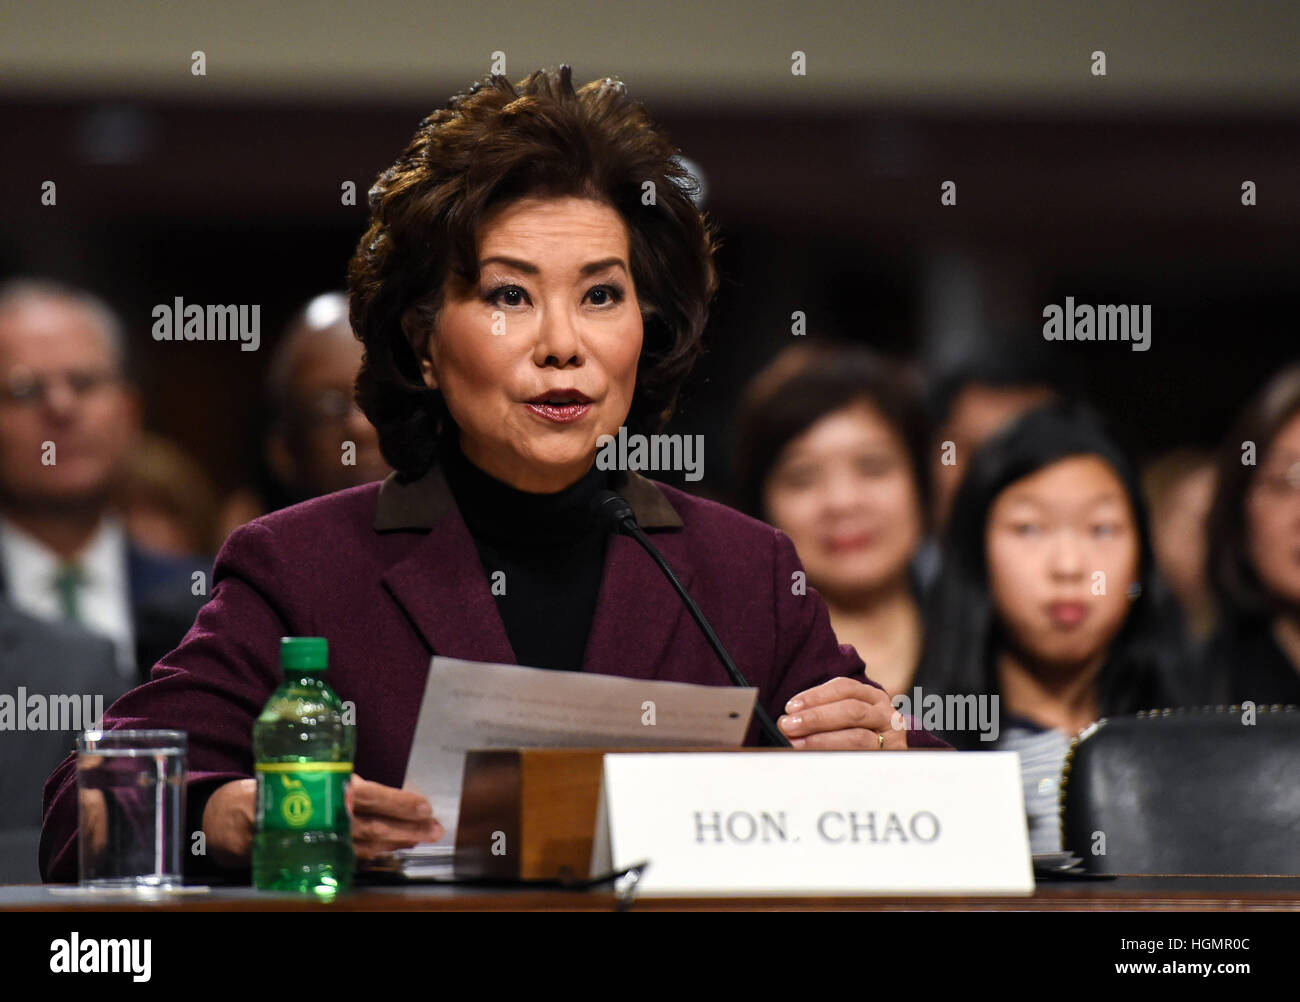 Washington, USA. 11th Jan, 2017. Elaine Chao testifies before the U.S. Senate Commerce, Science, and Transportation Committee during the confirmation hearing on her nomination to be Secretary of Transportation at Capitol Hill in Washington, DC, the United States. Trump's nominee to run the U.S. Department of Transportation Elaine Chao had her confirmation hearing on Wednesday. Chao was Deputy Secretary of Transportation under former Republican President George H.W. Bush, and Labor Secretary under George W. Bush. Credit: Bao Dandan/Xinhua/Alamy Live News Stock Photo